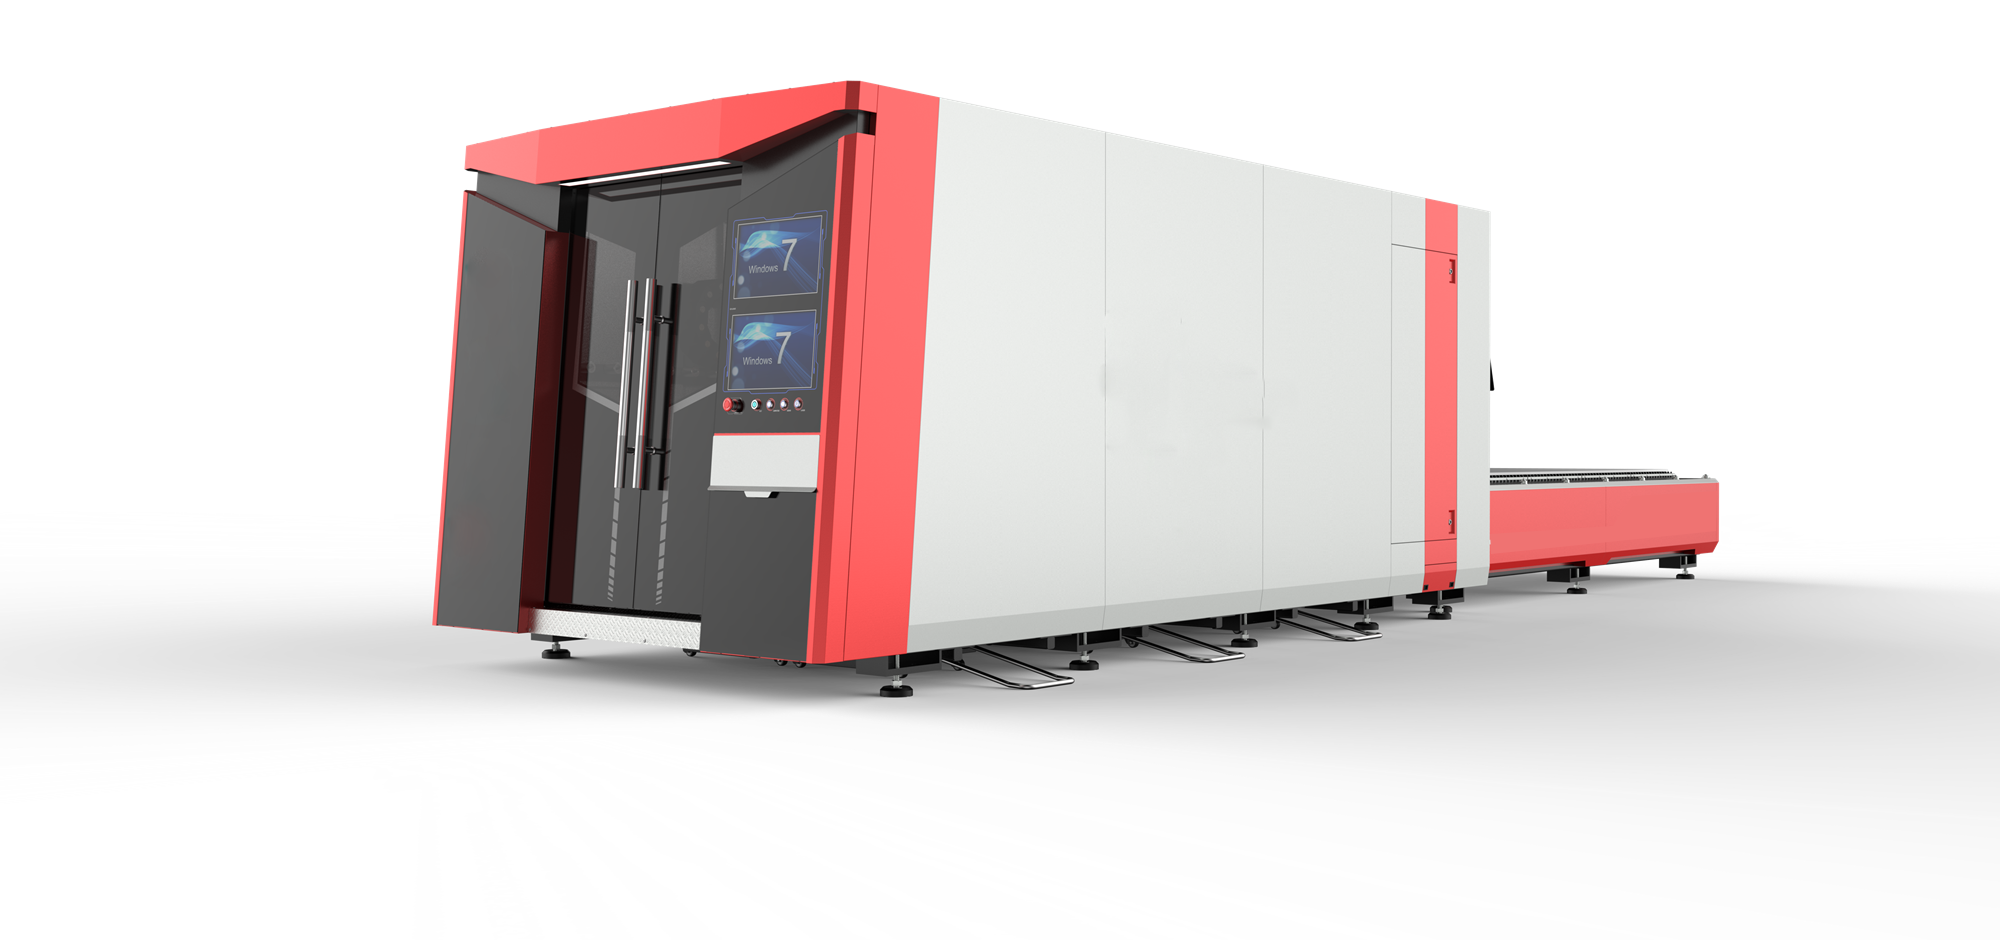 High Quality Cypcut 3015 Metal fiber Laser Cutting Machines with full surrounding enclosure Featured Image